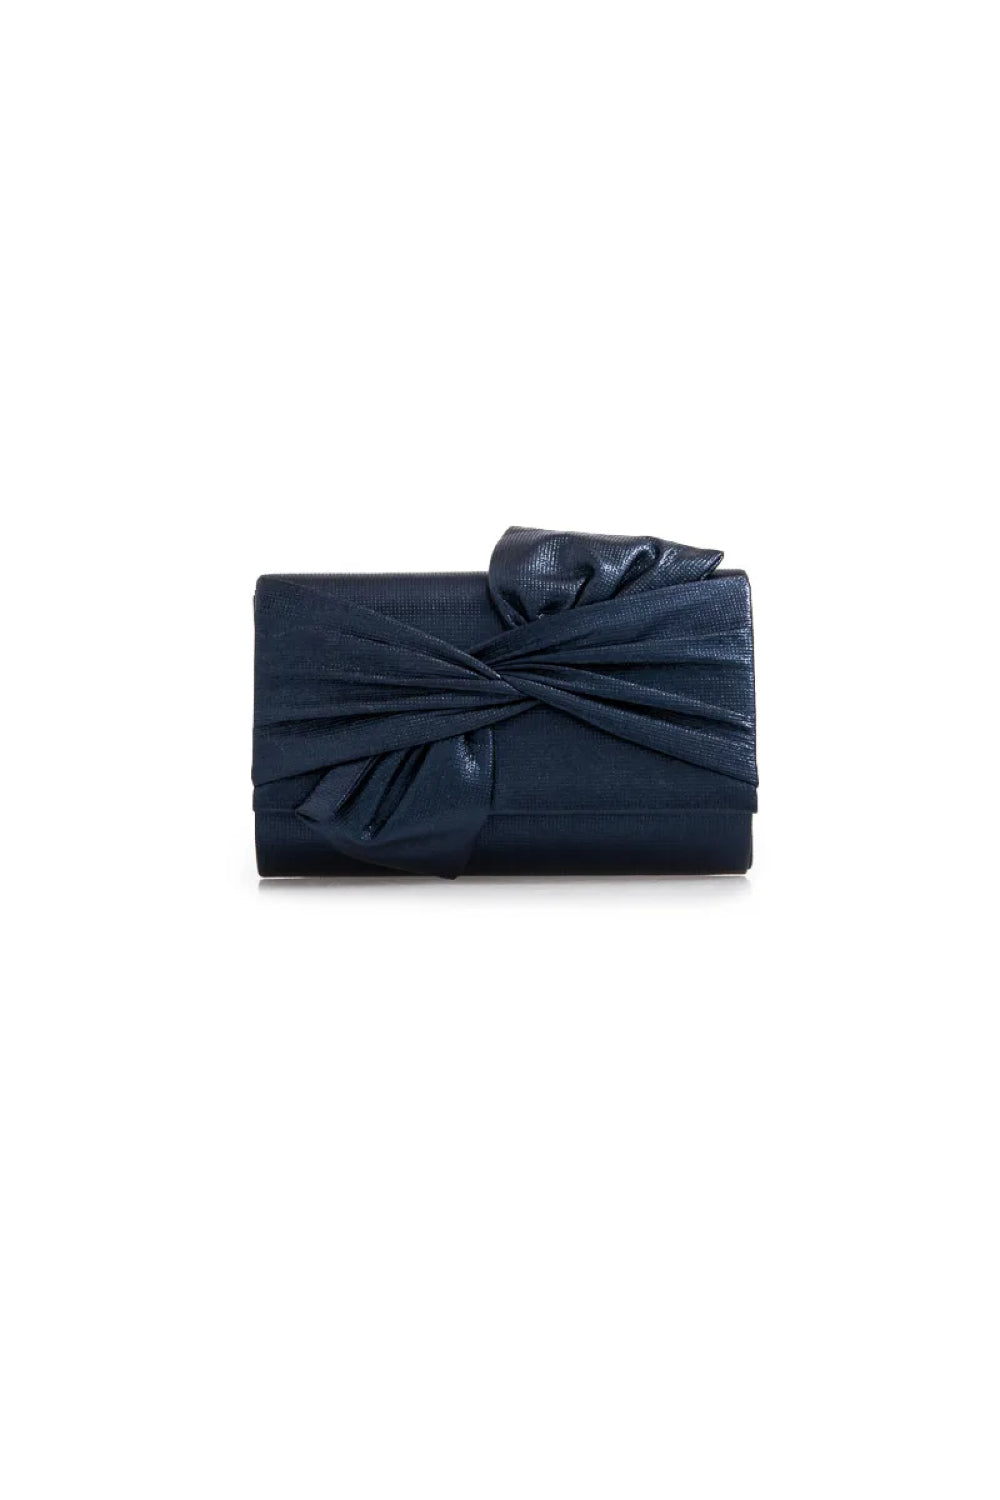 Navy Evening Clutch Bag with Bow Detail